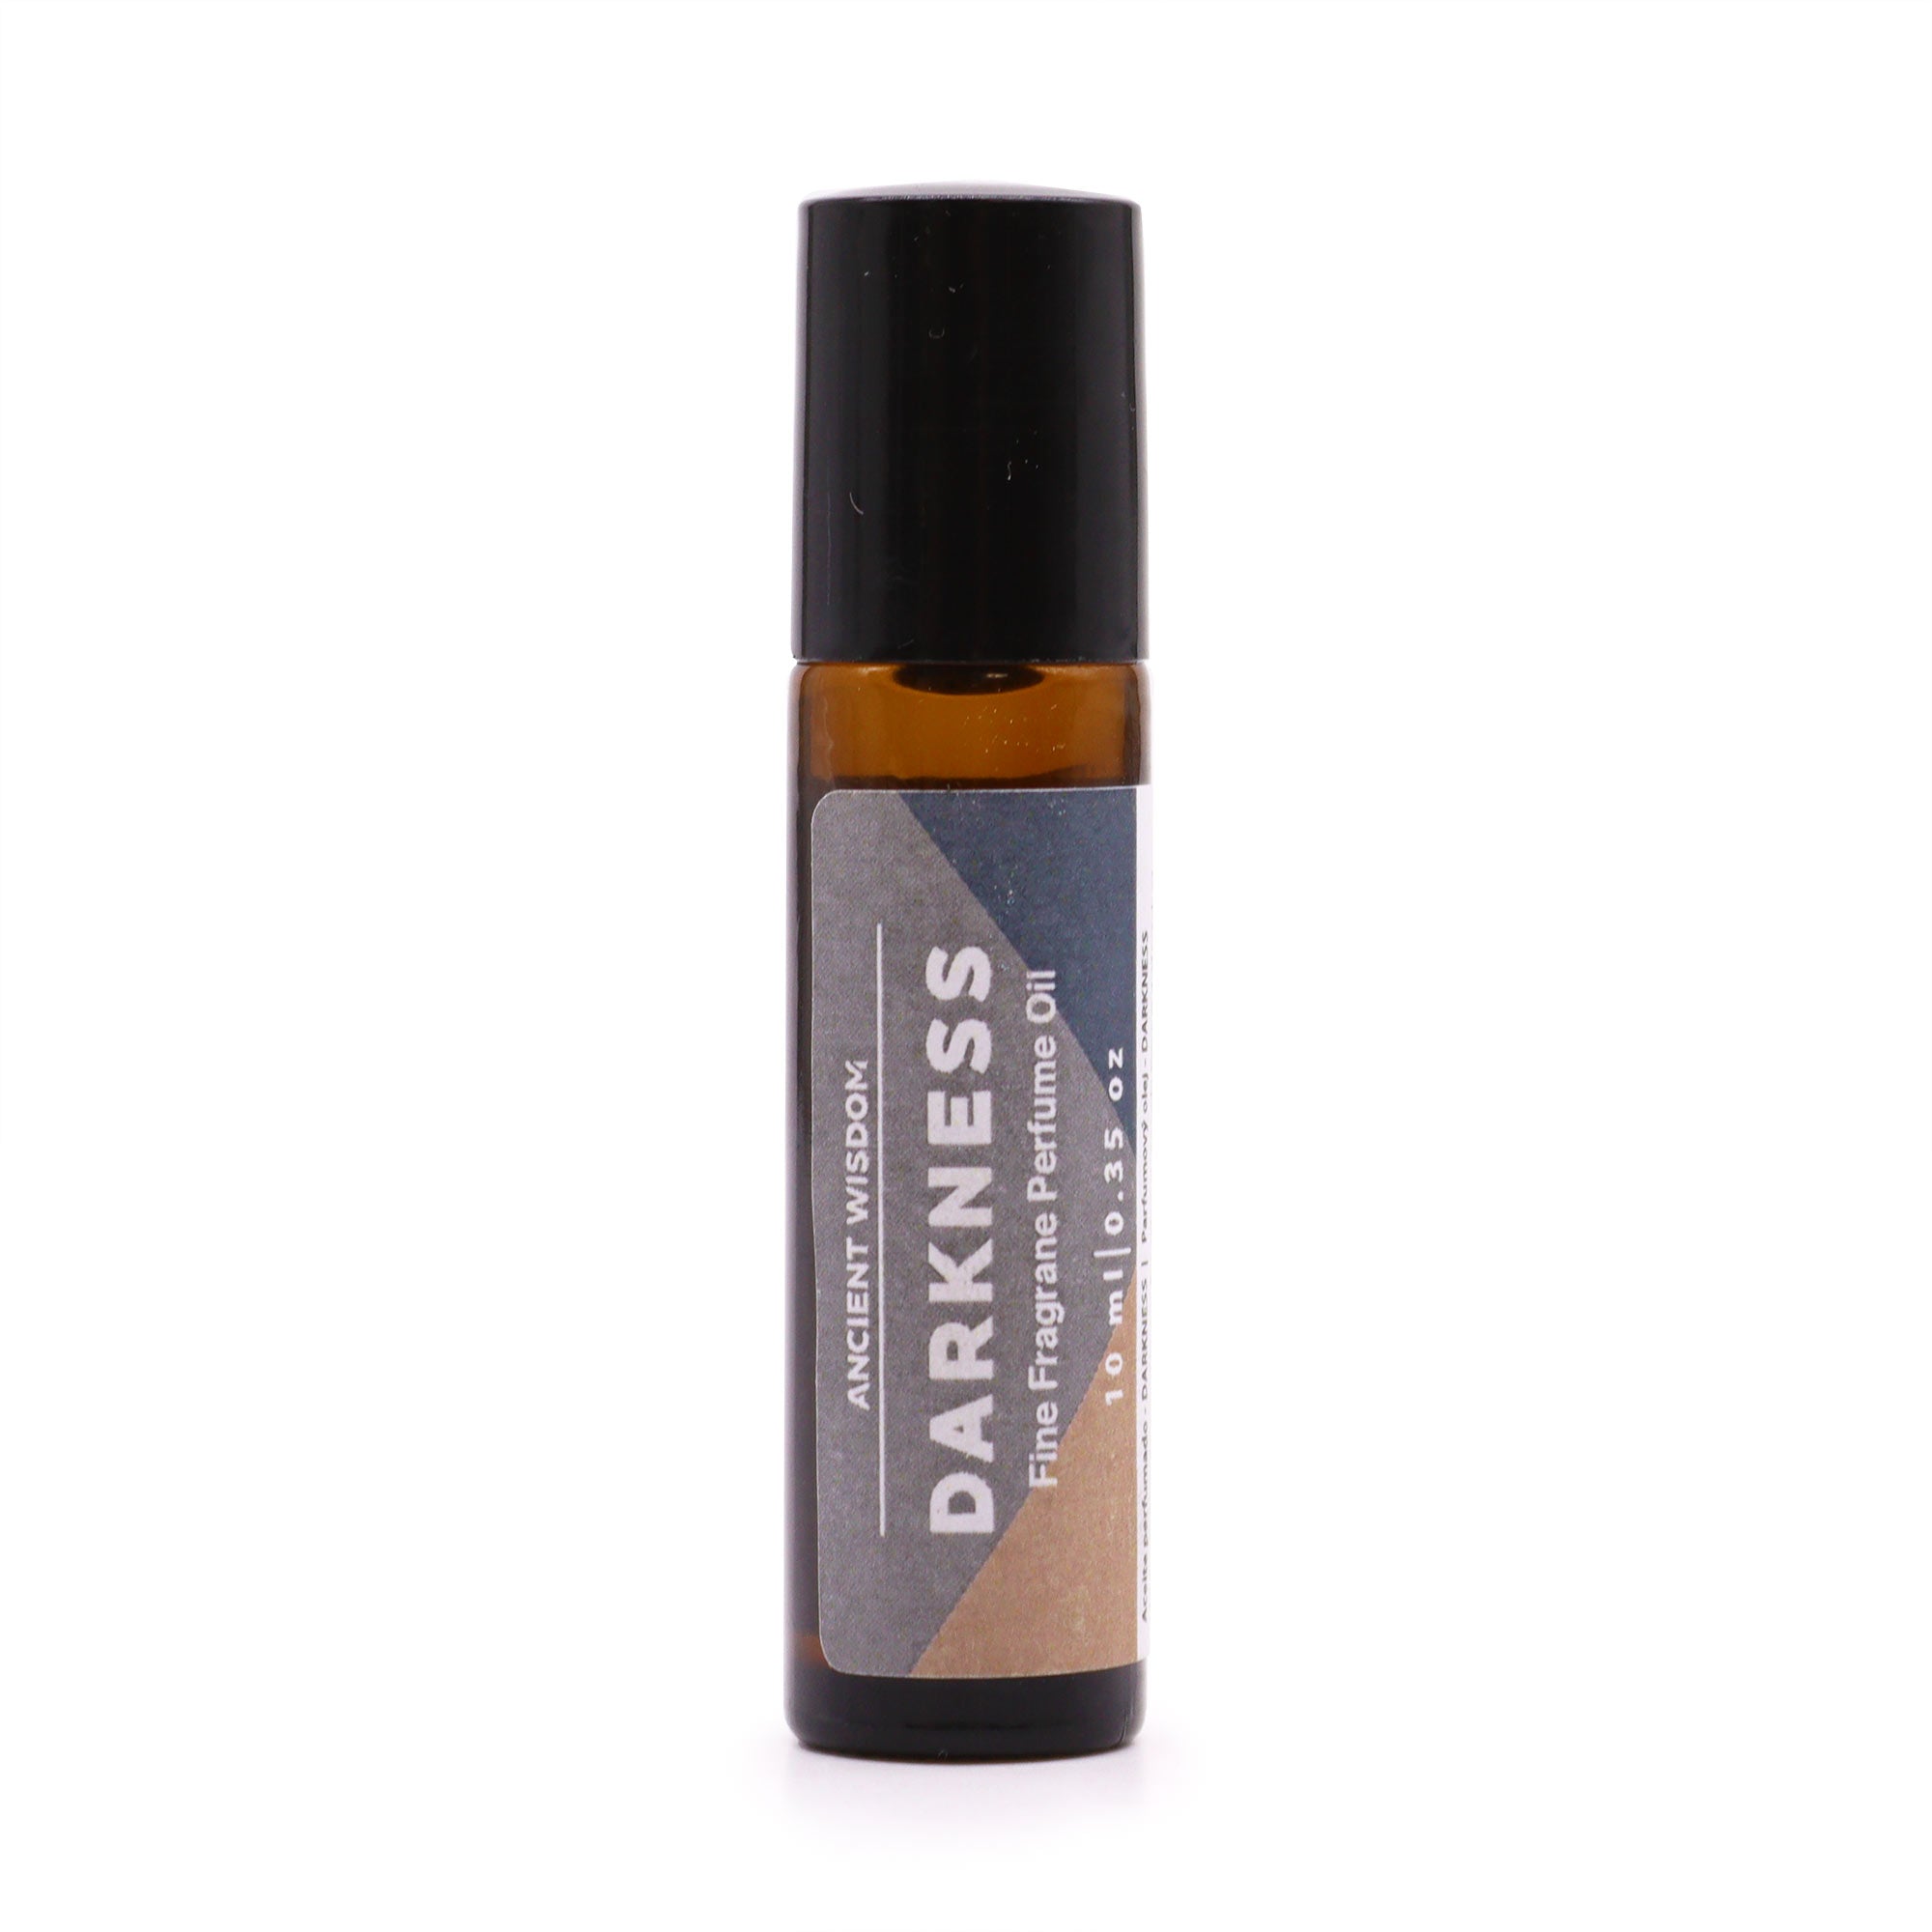 Darkness Fine Fragrance Perfume Oil 10ml - Inspired by &